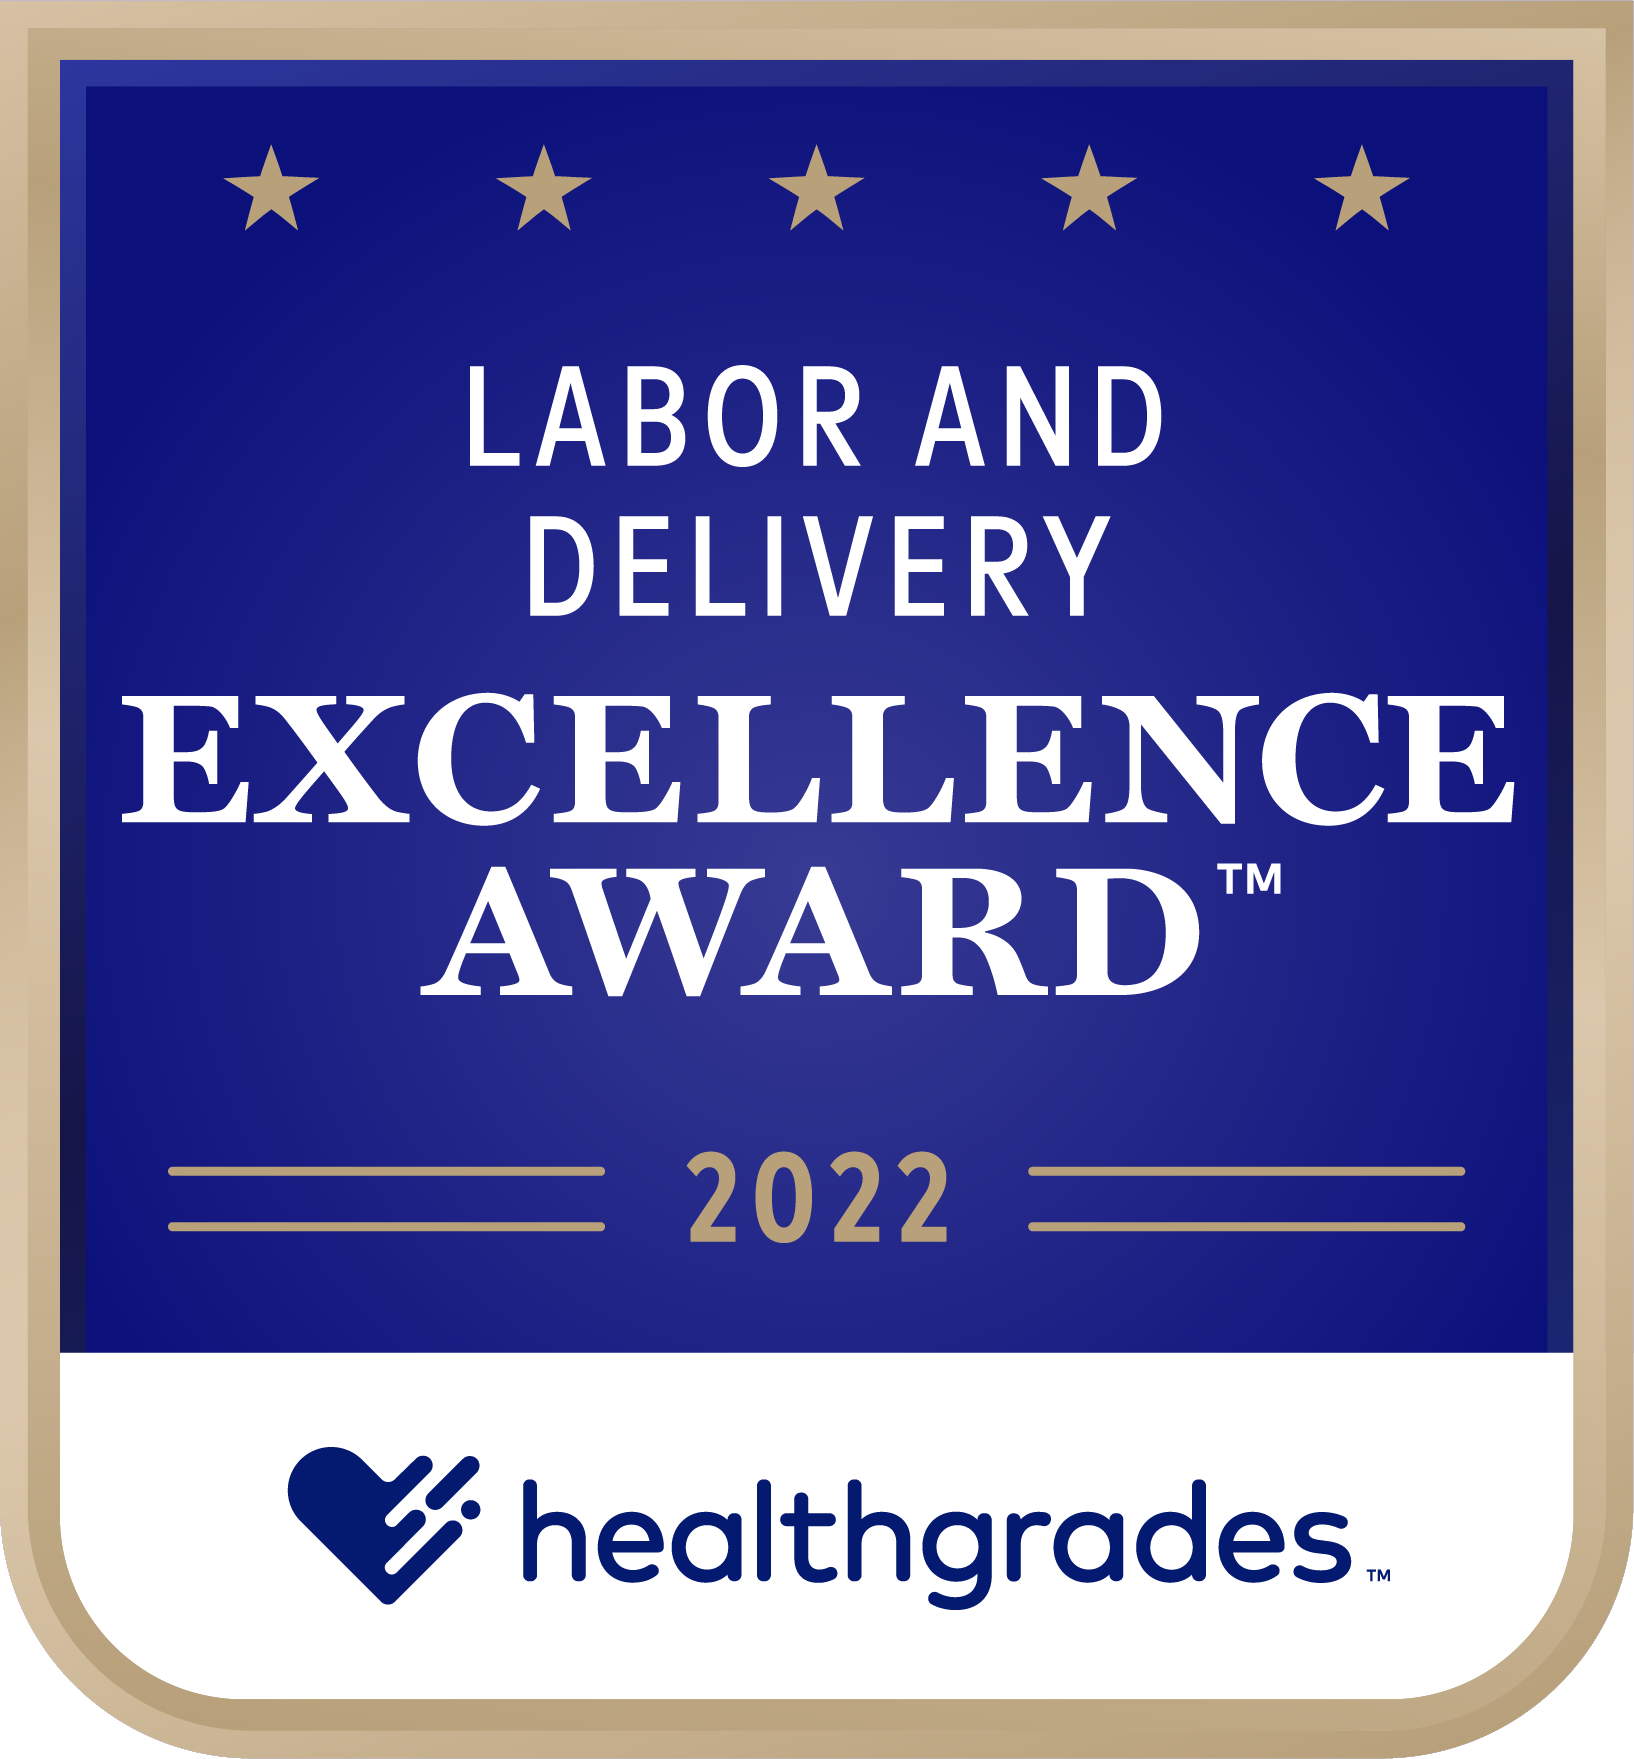 Healthgrades Women's Care Excellence Awards